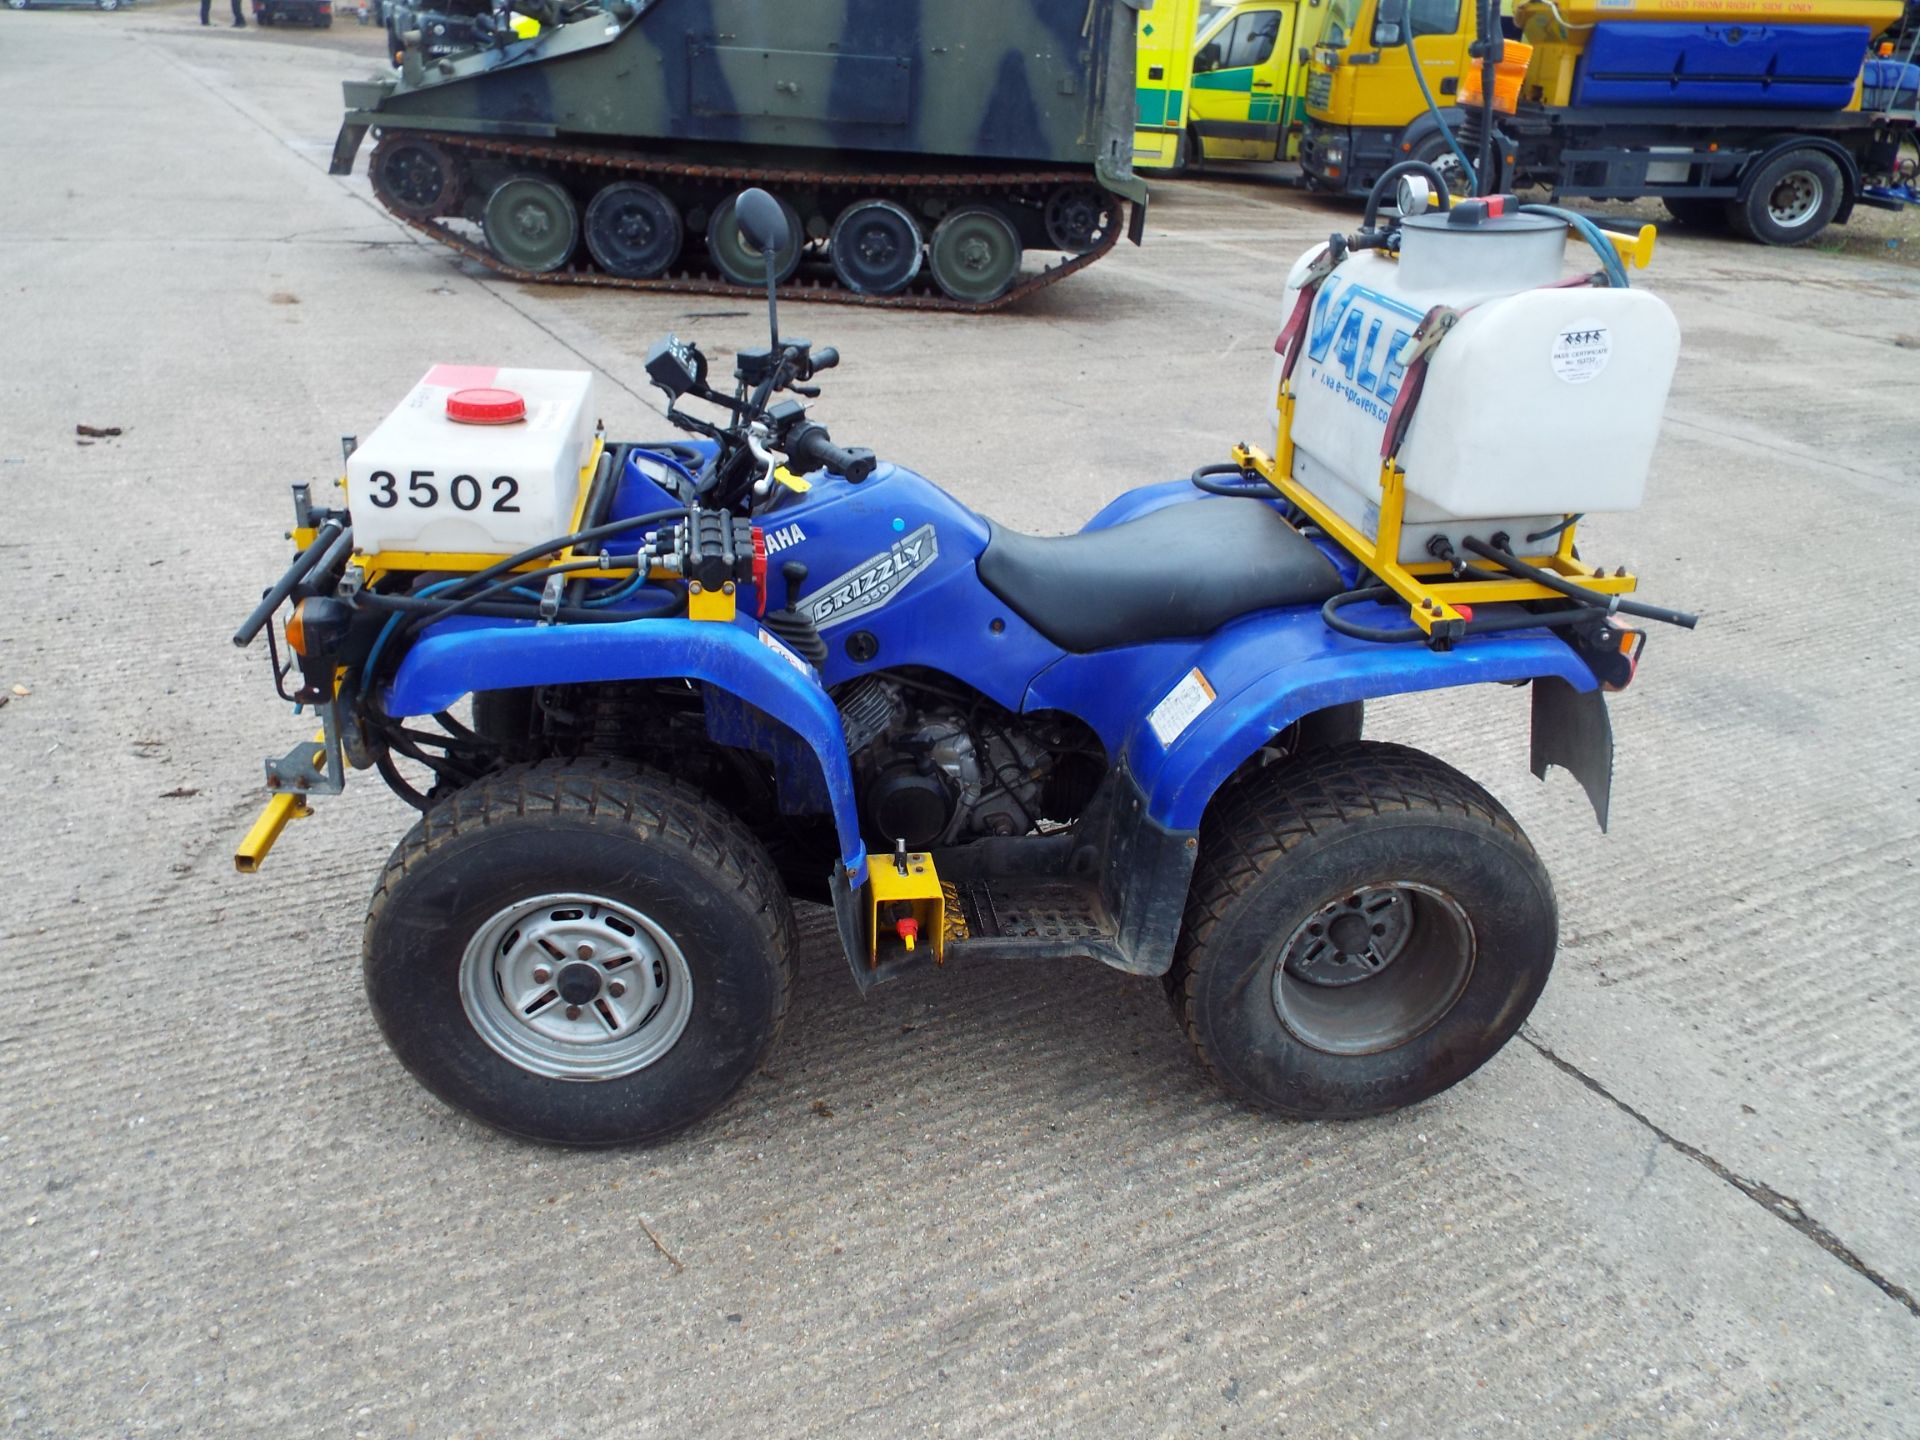 2008 Yamaha Grizzly 350 Ultramatic Quad Bike fitted with Vale Front/Rear Spraying Equipment - Bild 4 aus 26